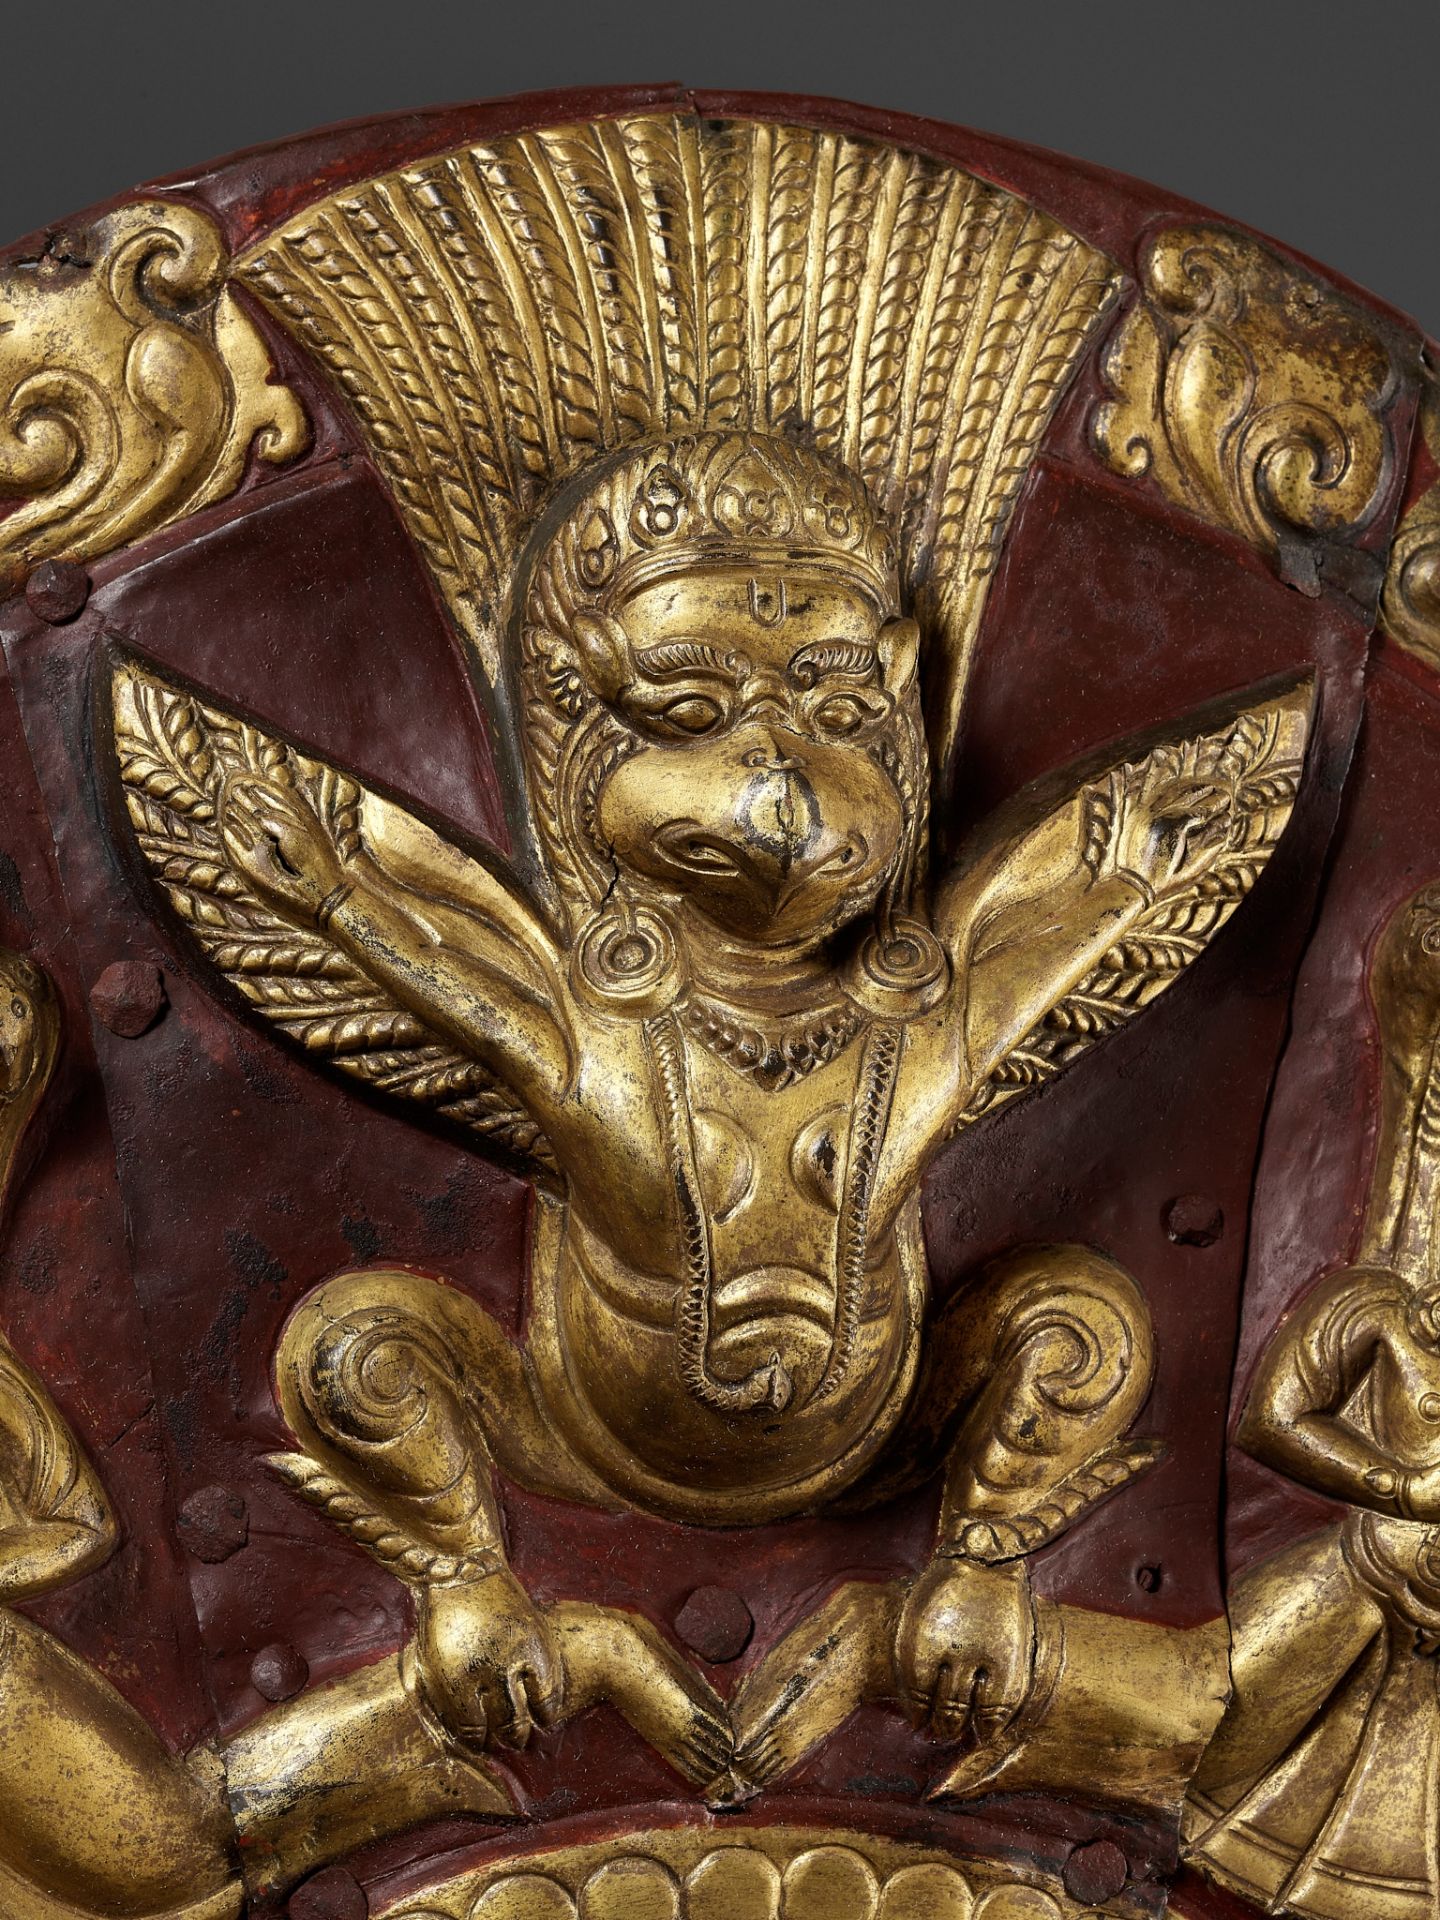 A LARGE GILT AND LACQUERED COPPER REPOUSSE TORANA, NEPAL, 17TH-18TH CENTURY - Image 2 of 8